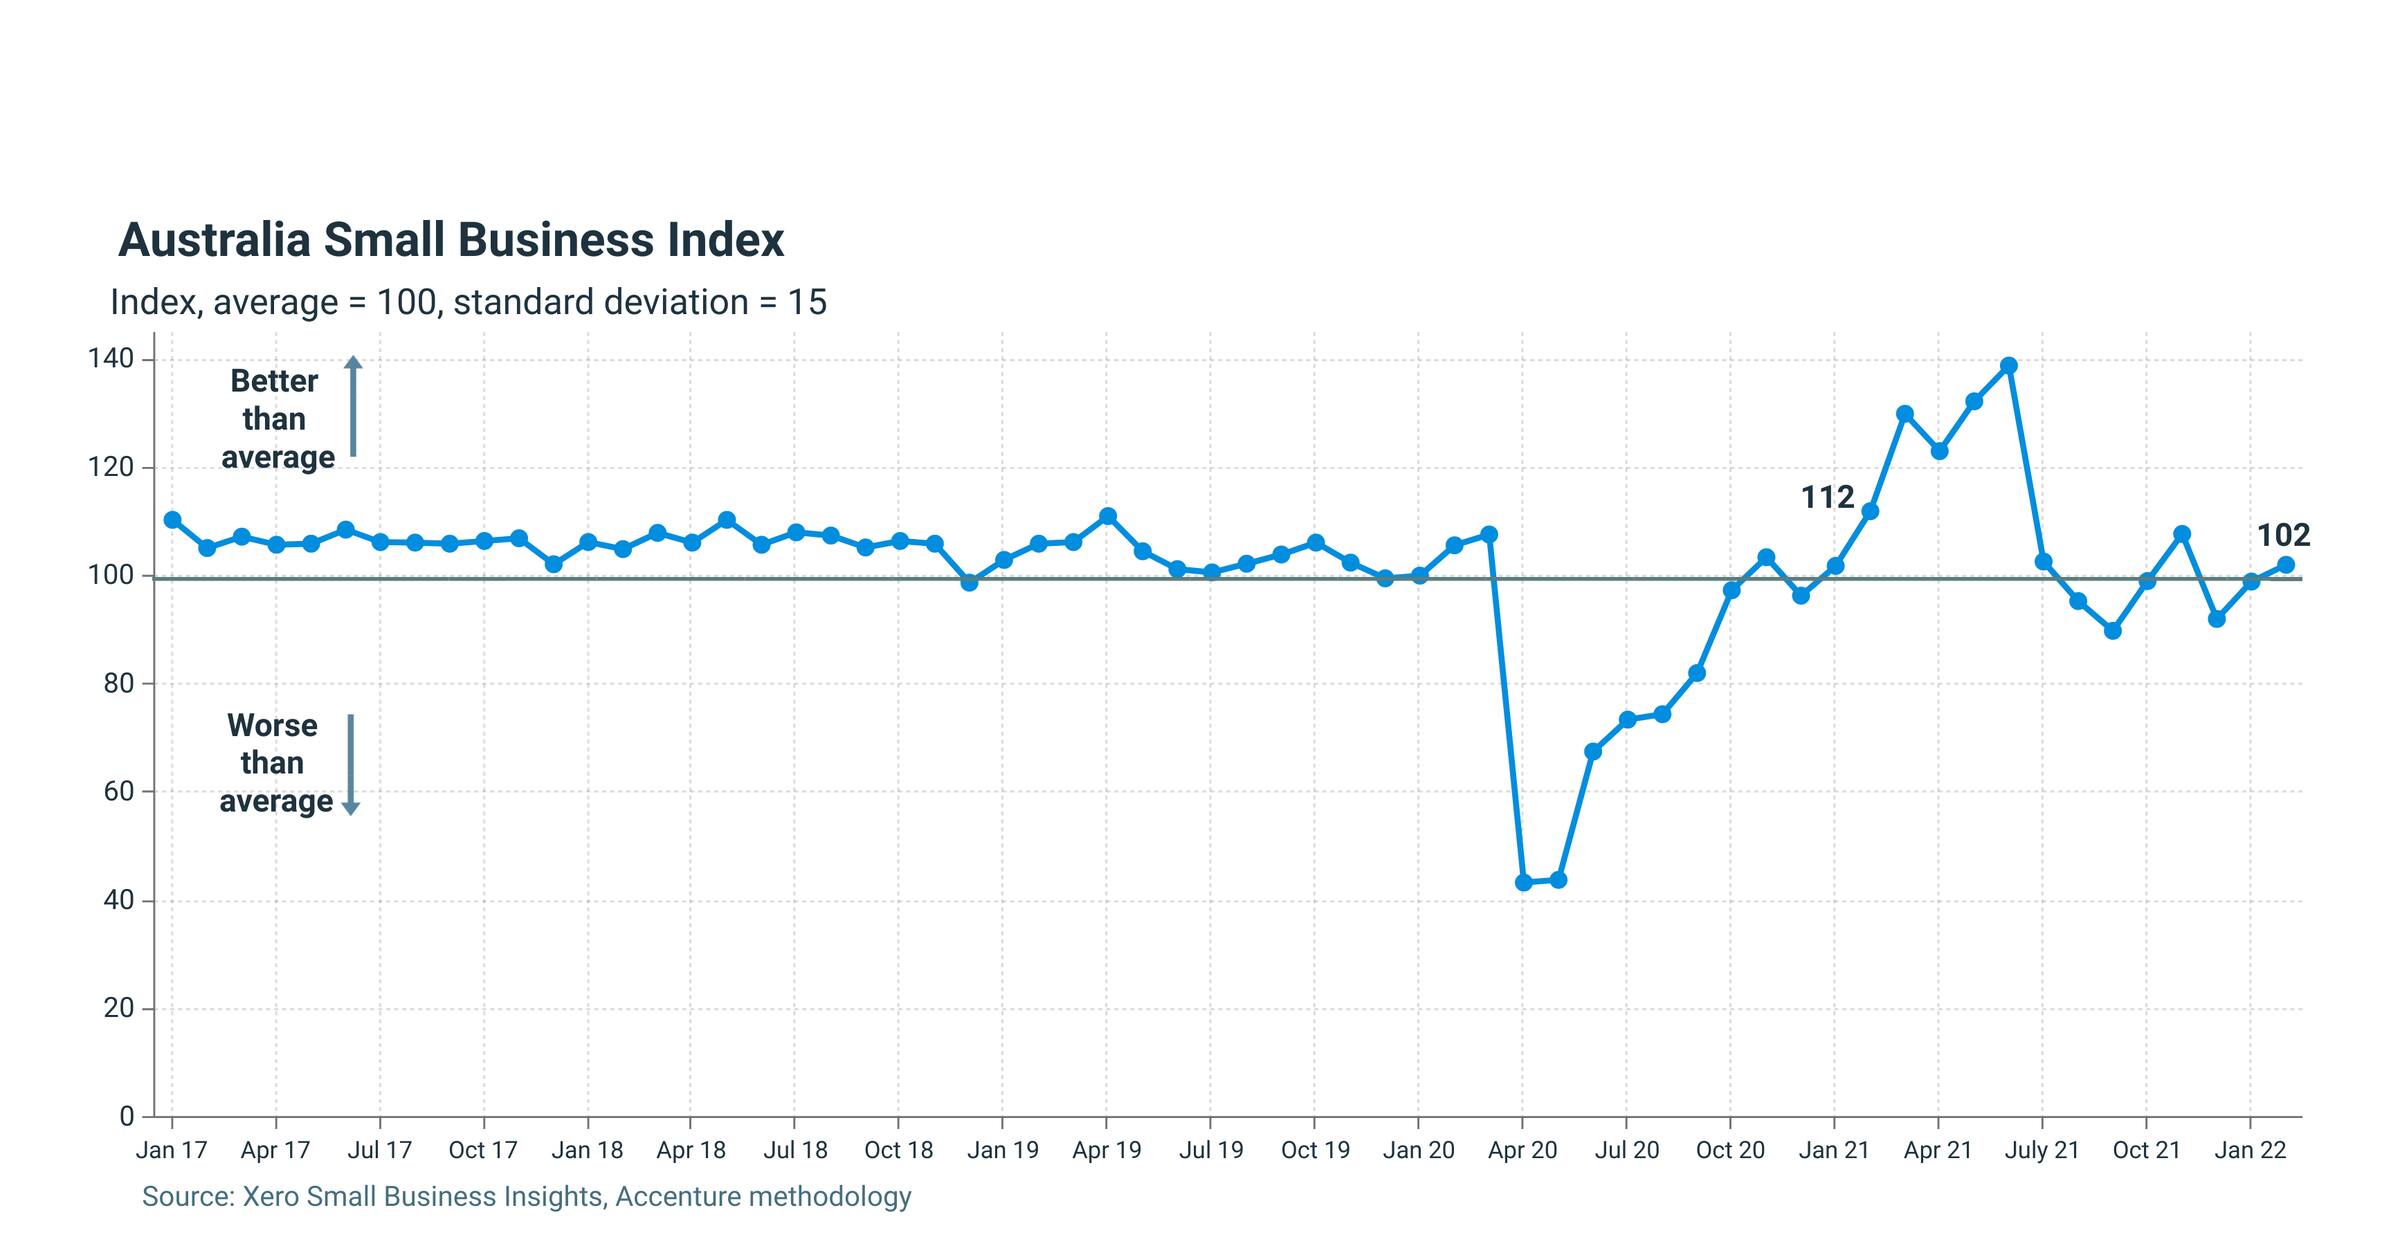 The graph shows that the Index rose three points in February 2022 to 102 points